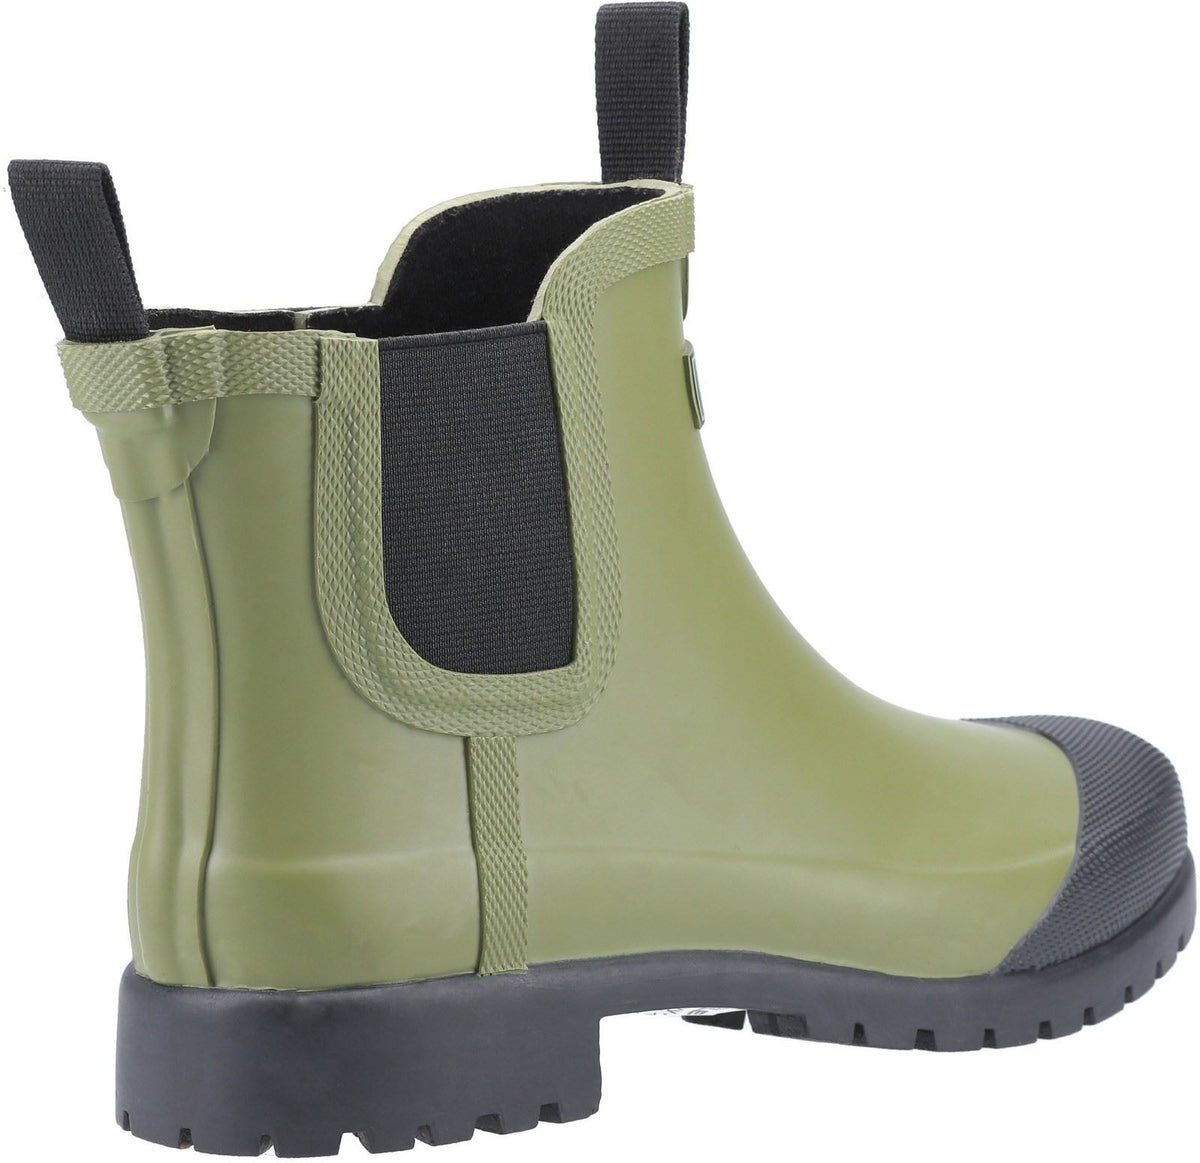 Cotswold Blenheim Waterproof Ankle Boots